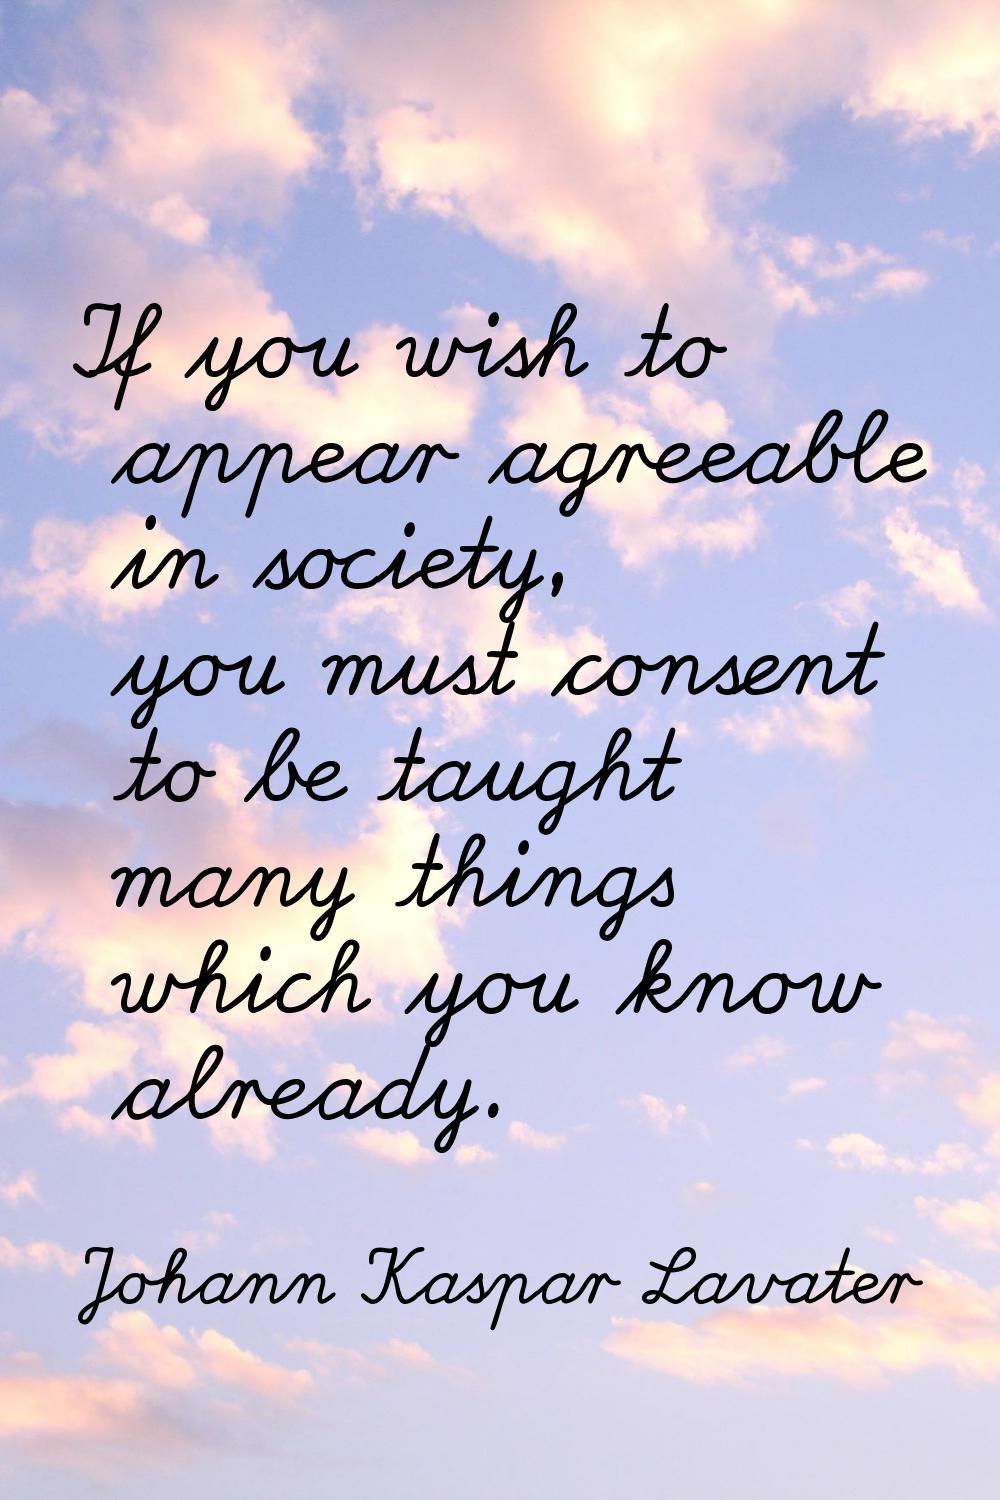 If you wish to appear agreeable in society, you must consent to be taught many things which you kno